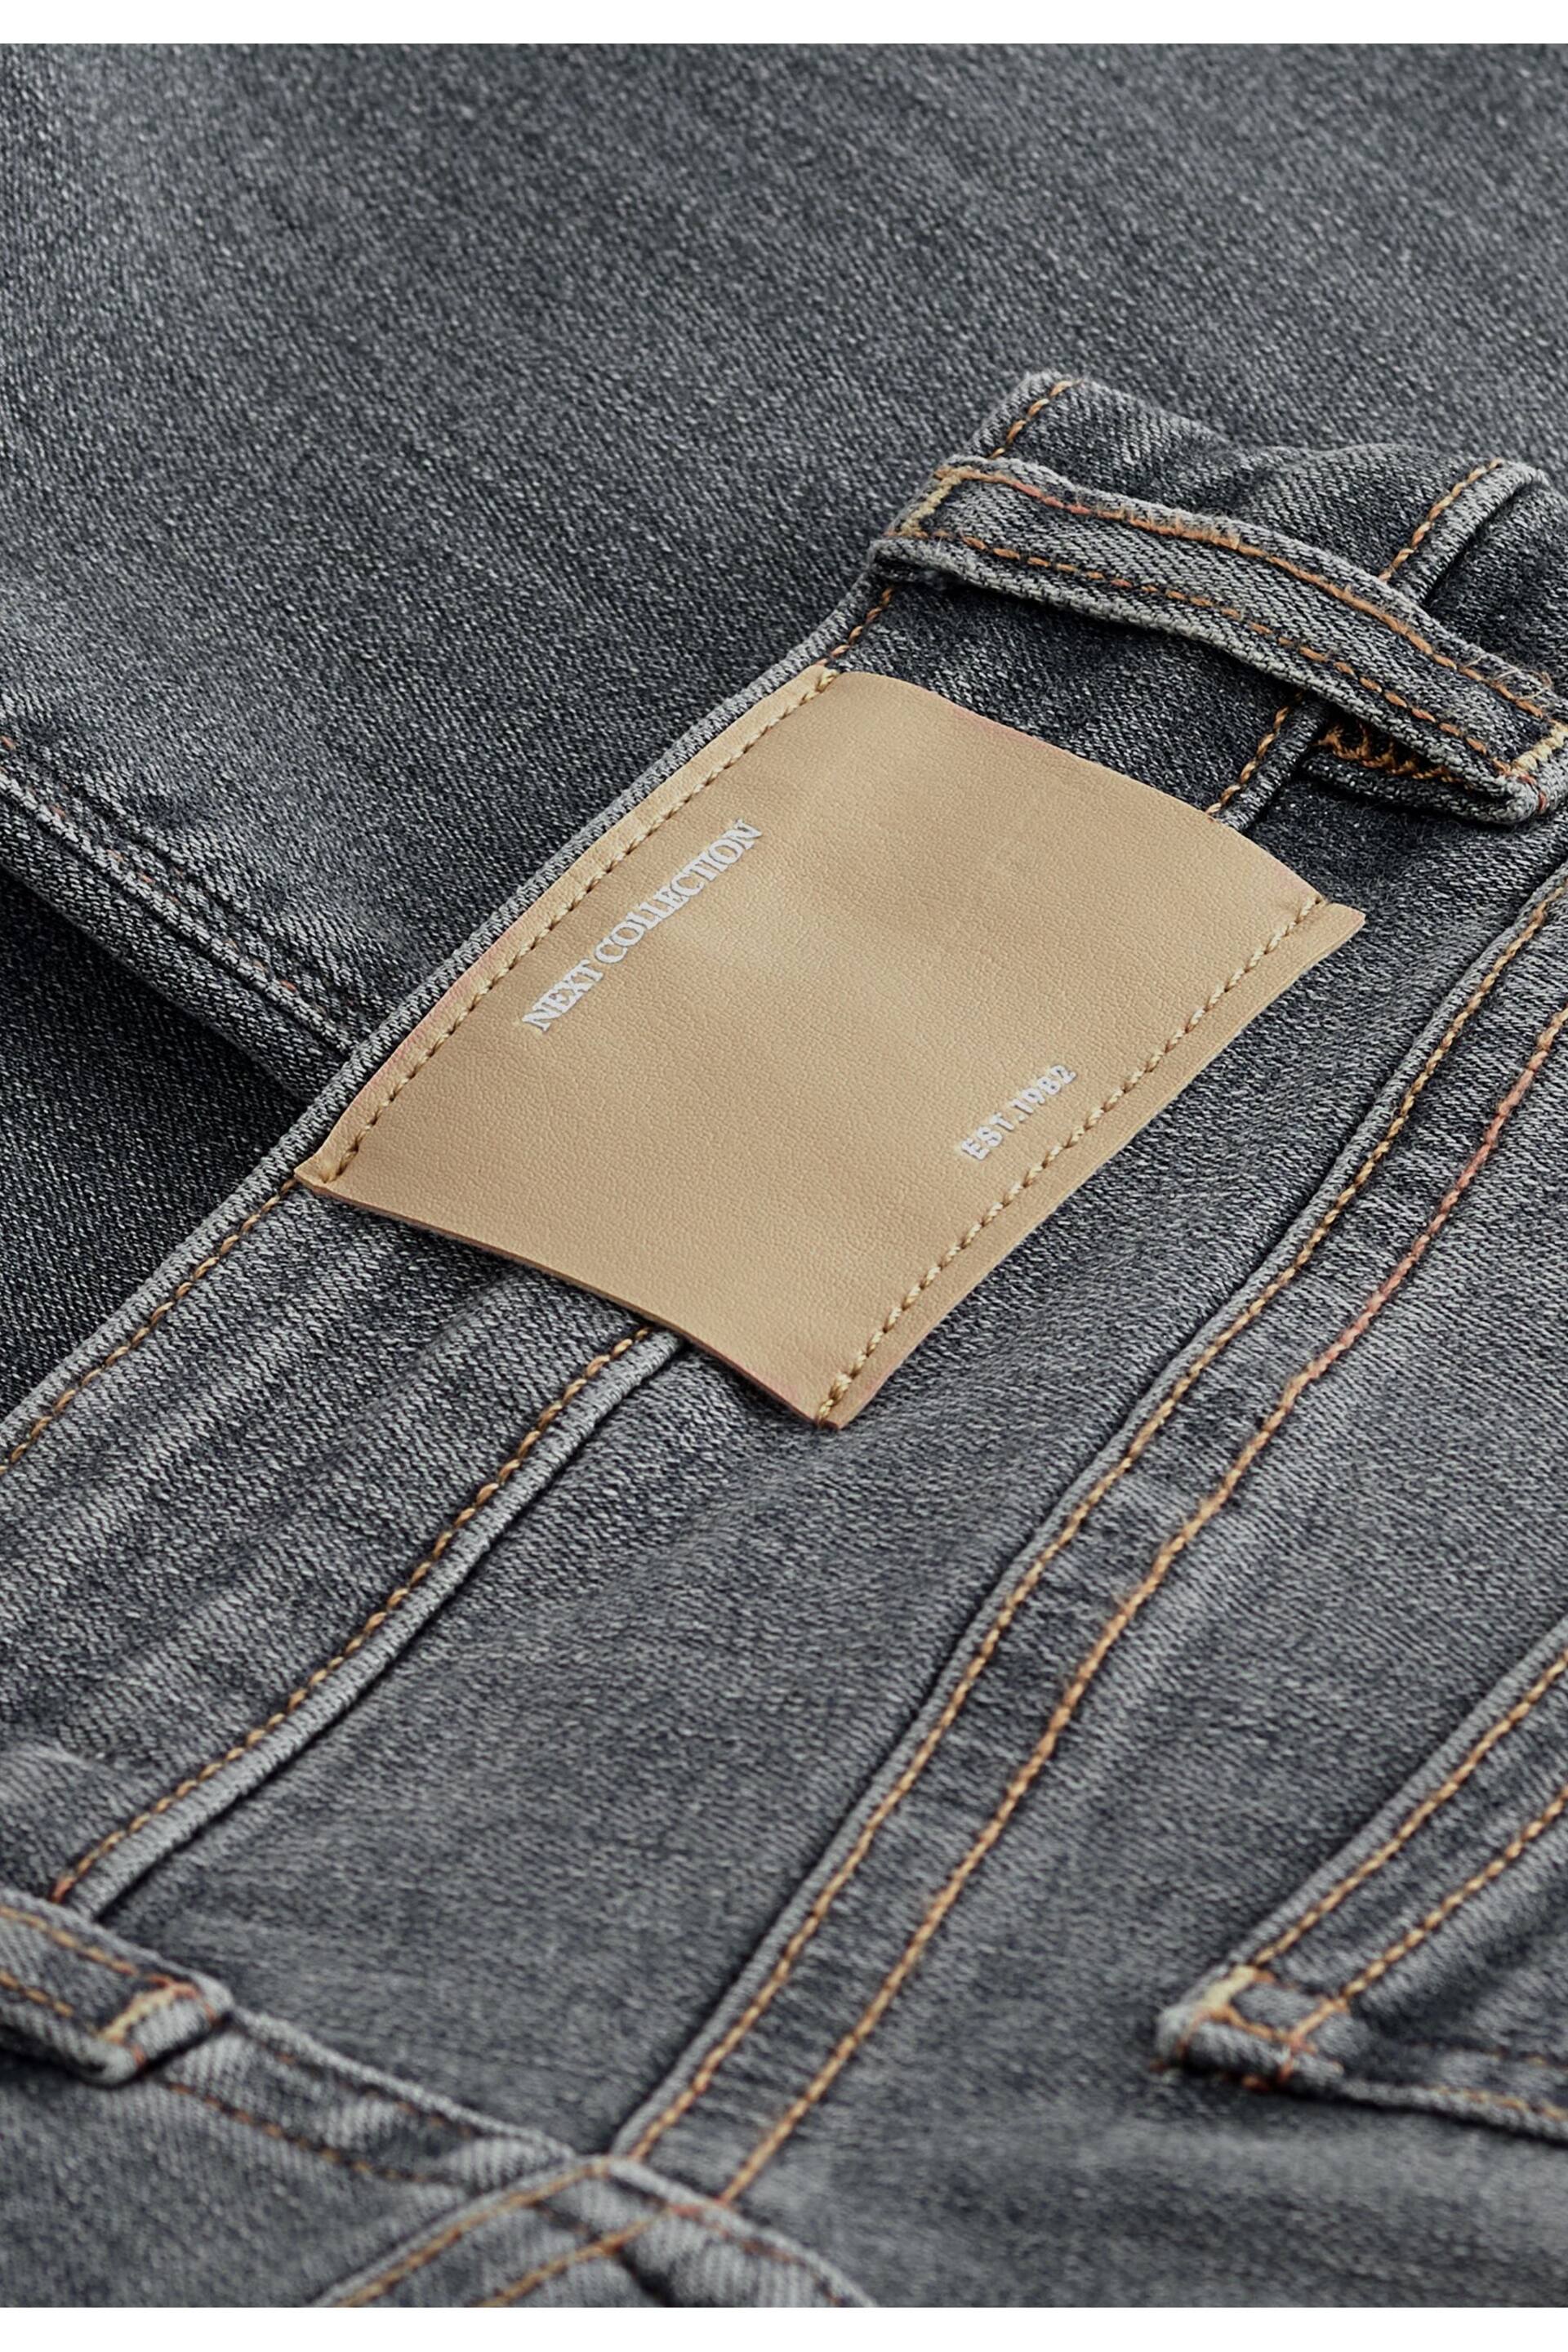 Grey Low Bootcut Jeans - Image 5 of 5